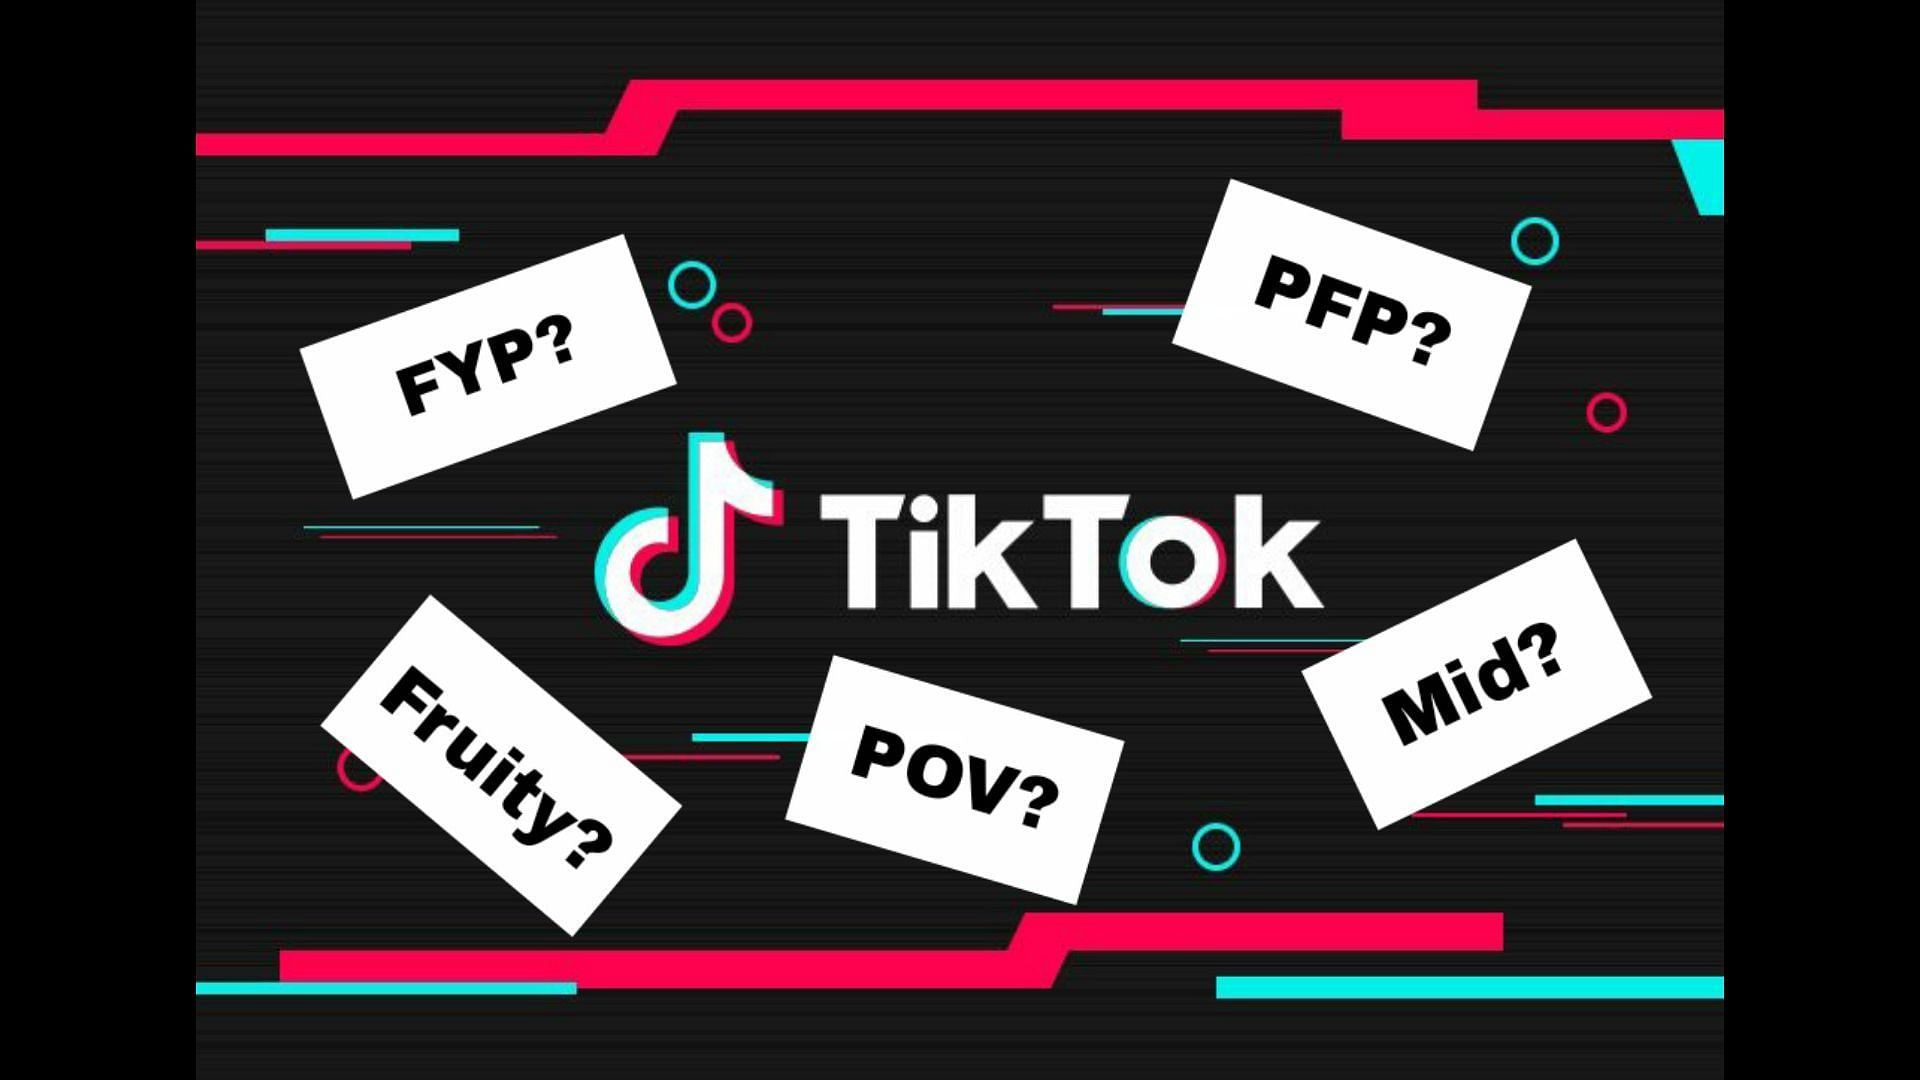 guide to TikTok slang meaning of FYP, POV, PFP, mid and